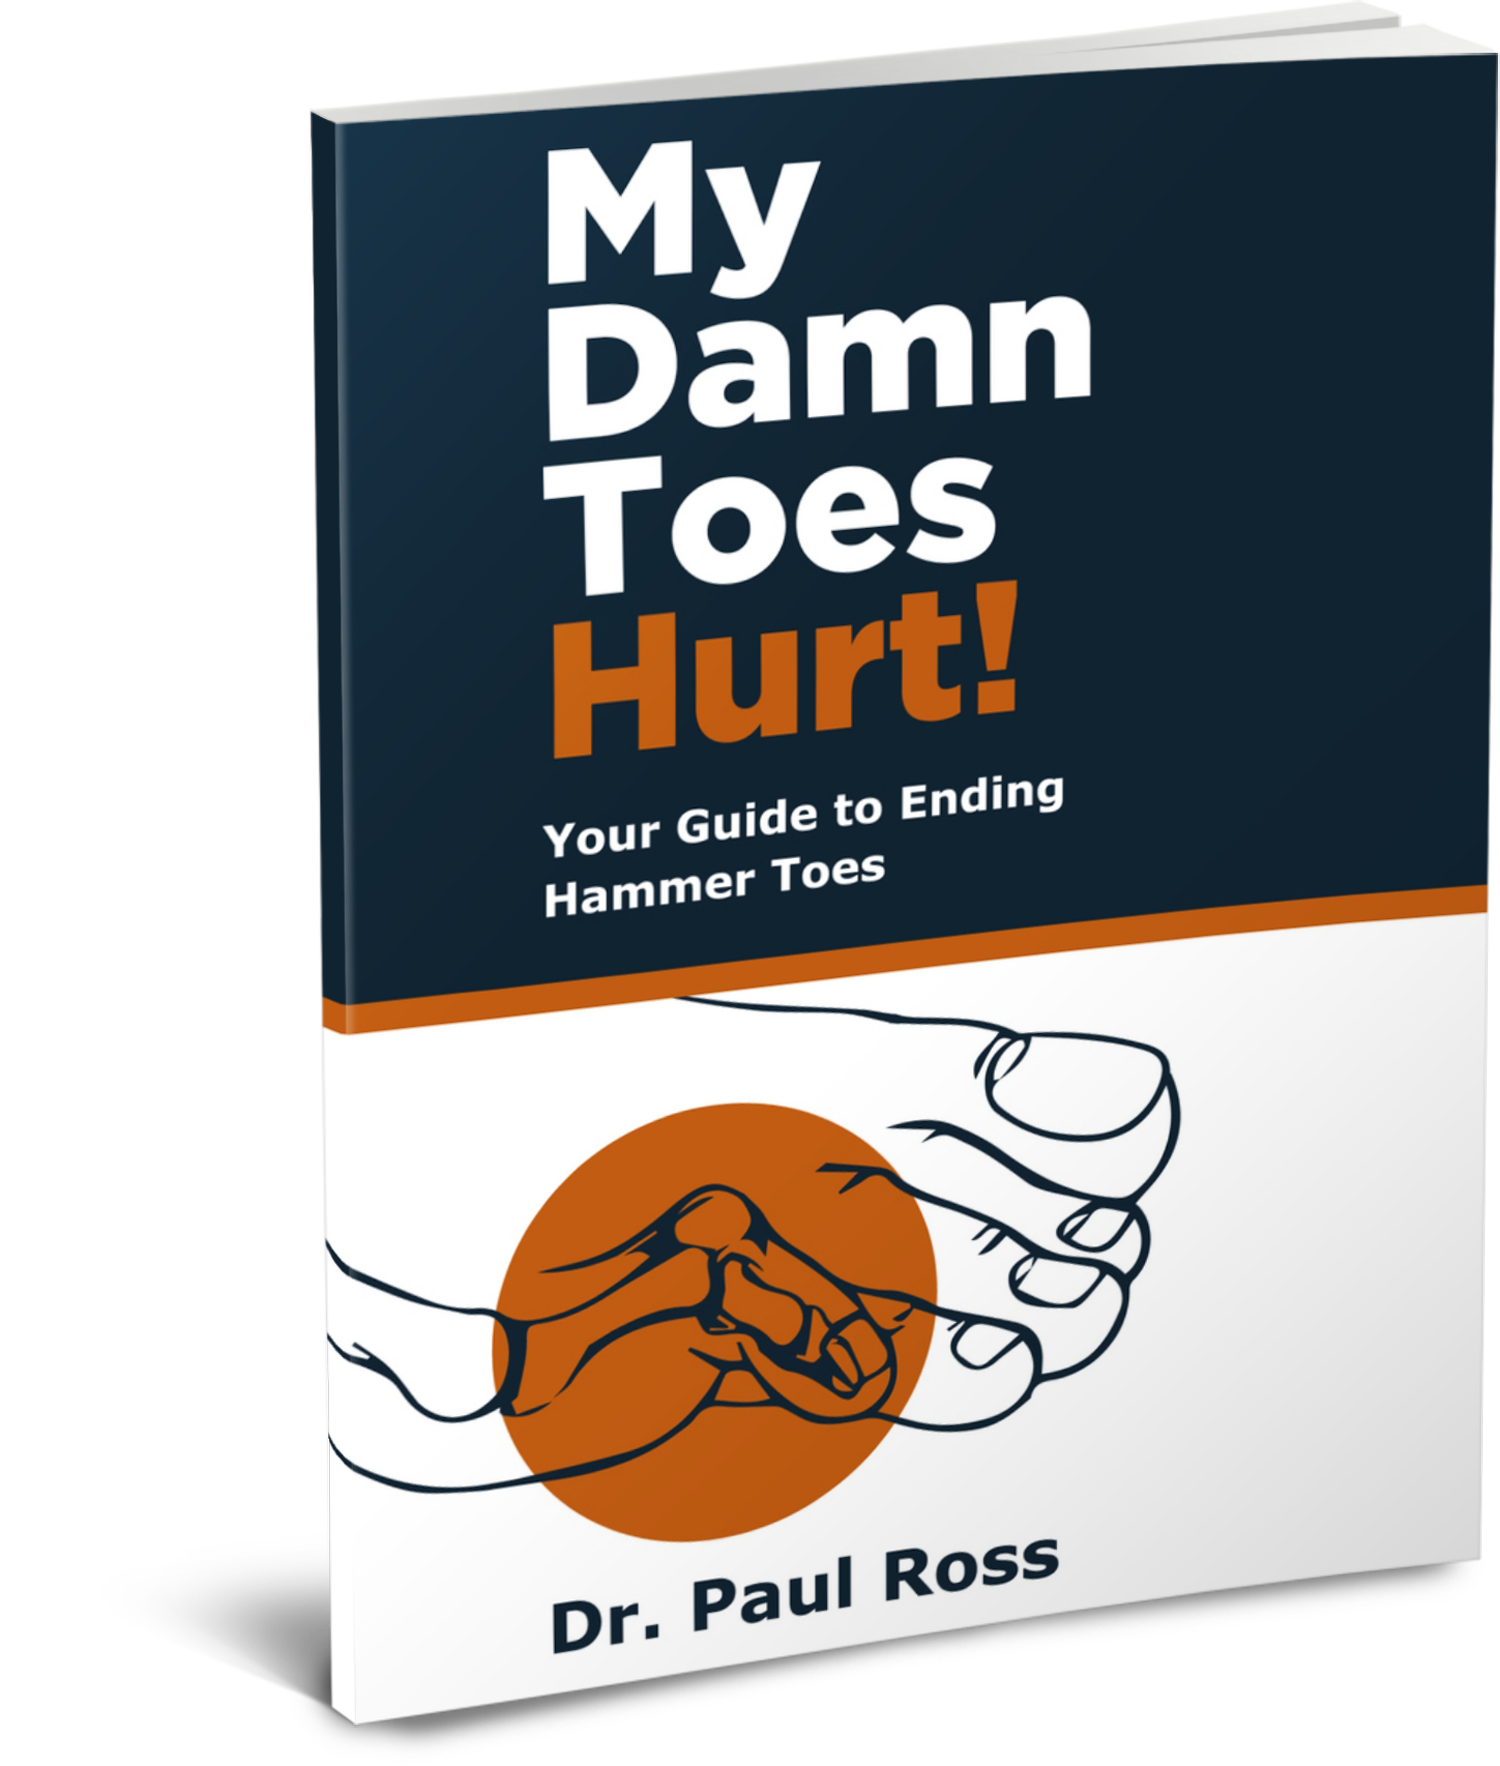  My Damn Toes Hurt! Paul Ross, Founder &amp; CEO of The Podiatry Center, with clinics in Maryland and Virginia, about his latest book 'My Damn Toe Hurts,' and how it's helping him dominate another niche within their business.   Listen to Paul’s  conv